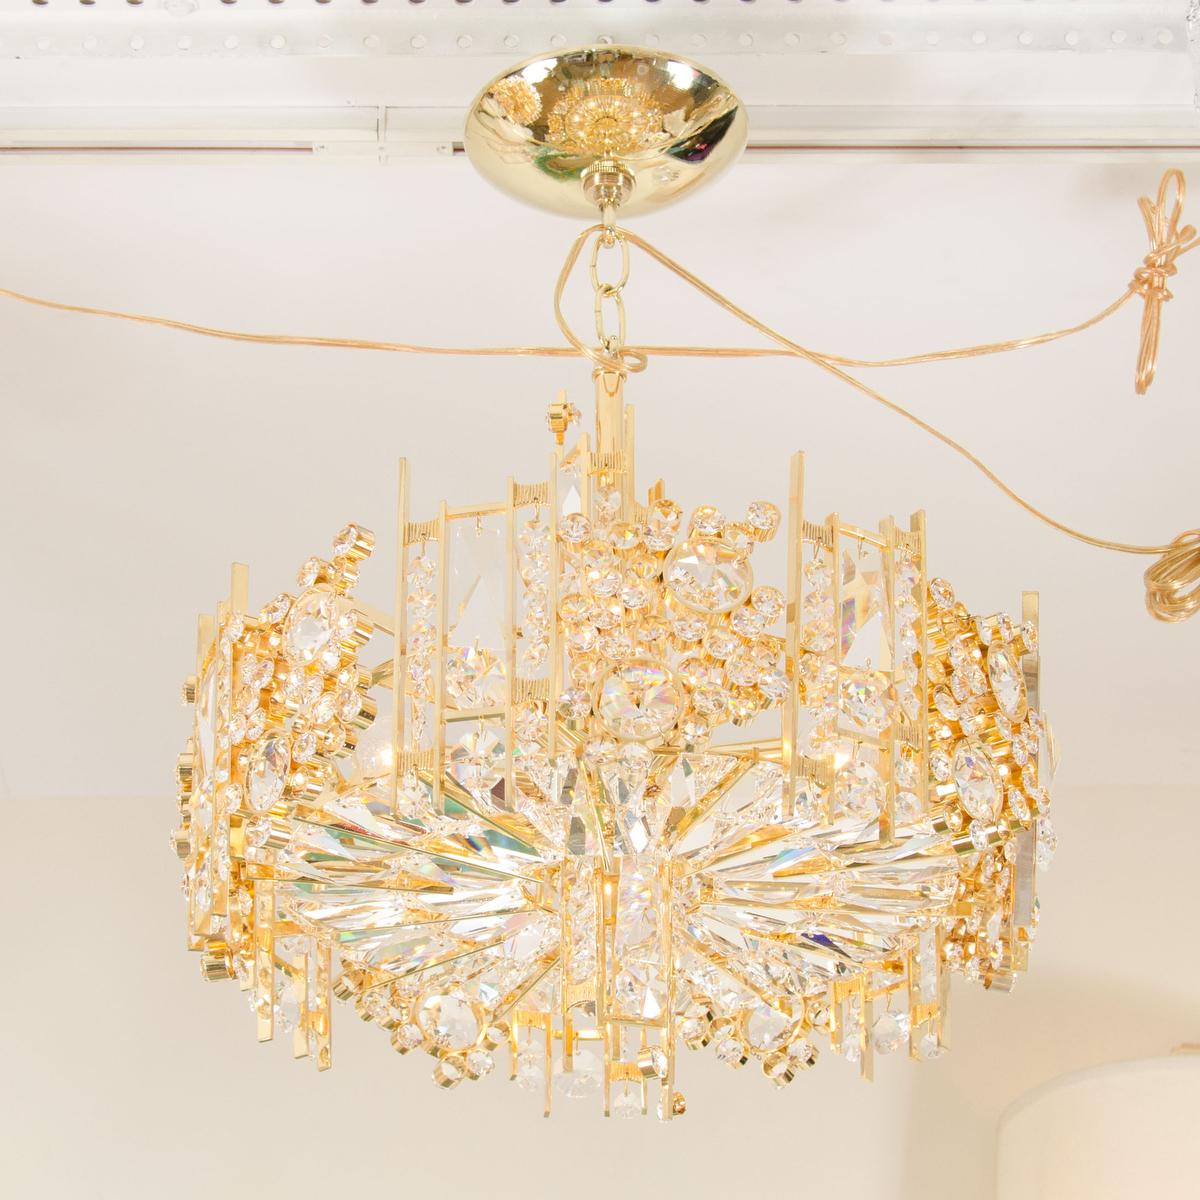 Brass chandelier composed of densely clustered inset crystal elements with decorative collar detail by Palwa.